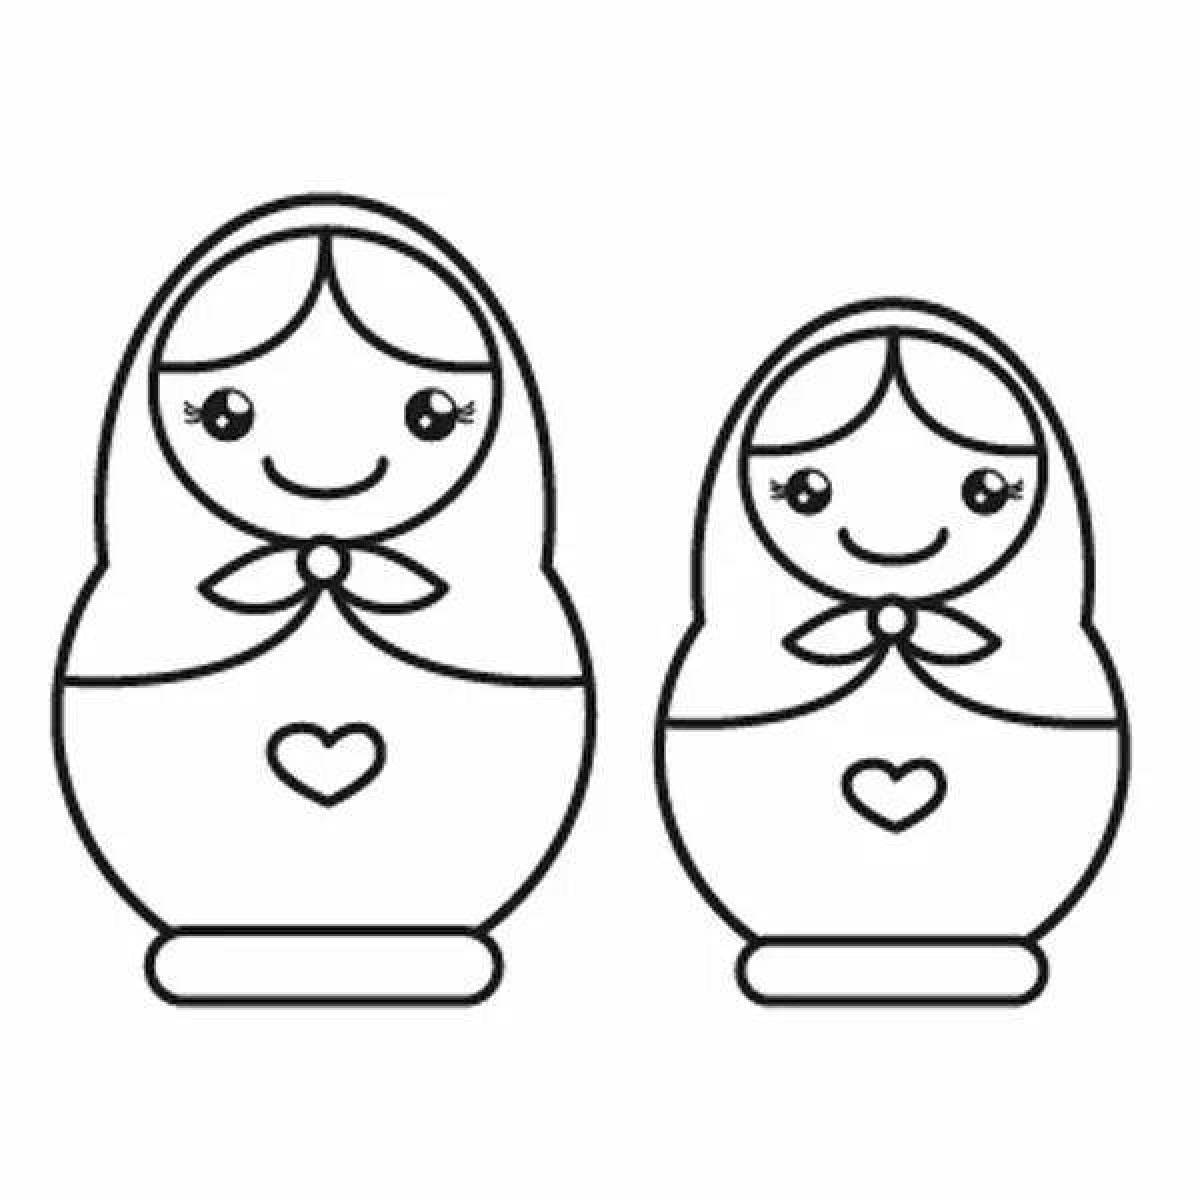 Colorful matryoshka coloring book for toddlers